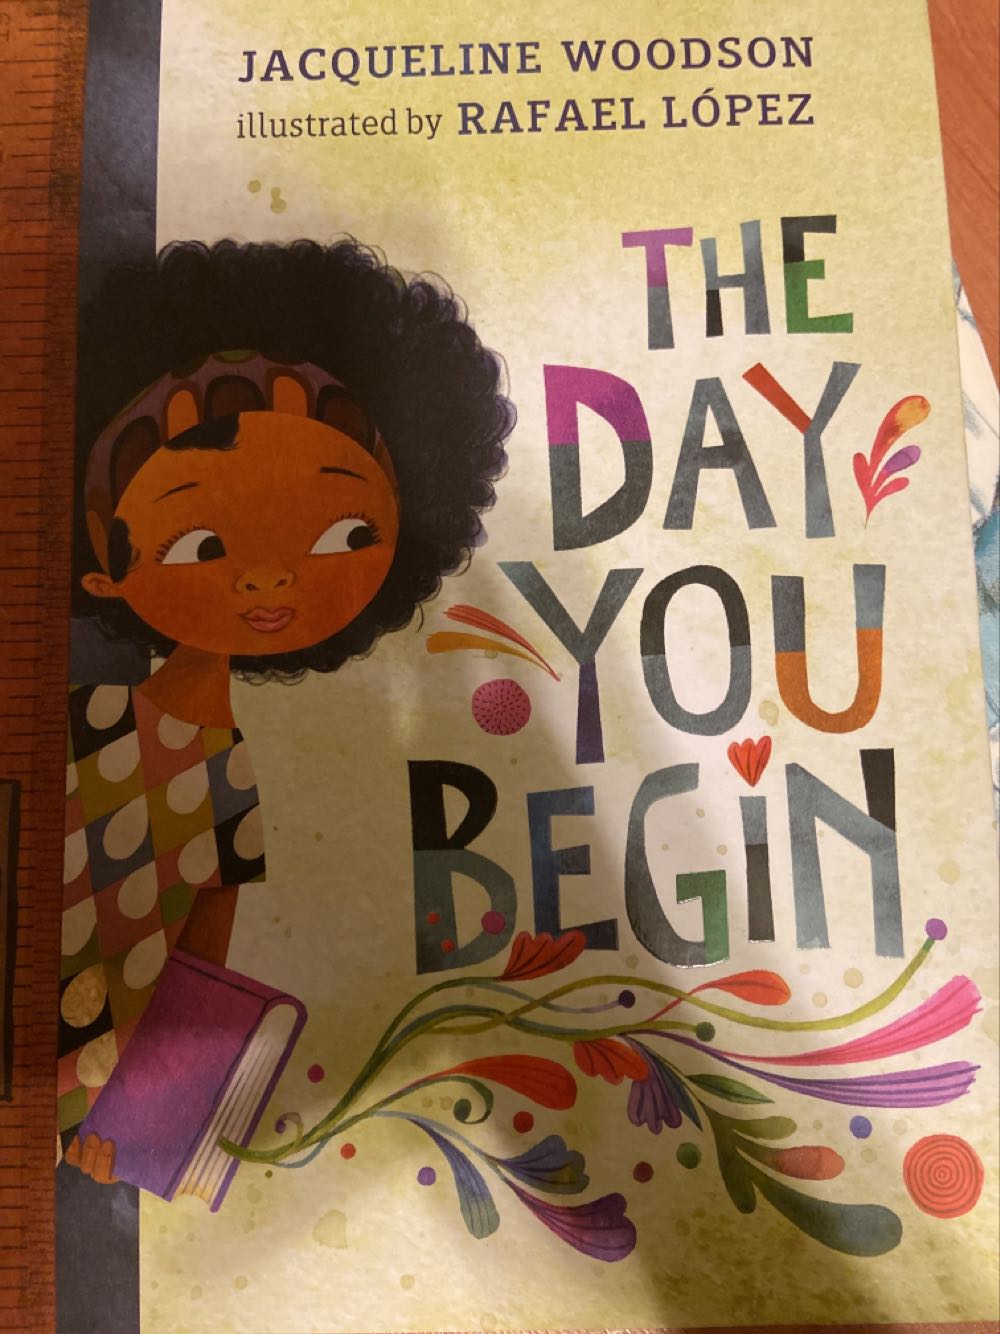 The Day You Begin - Jacqueline Woodson (Nancy Paulsen Books - Hardcover) book collectible [Barcode 9780399246531] - Main Image 1